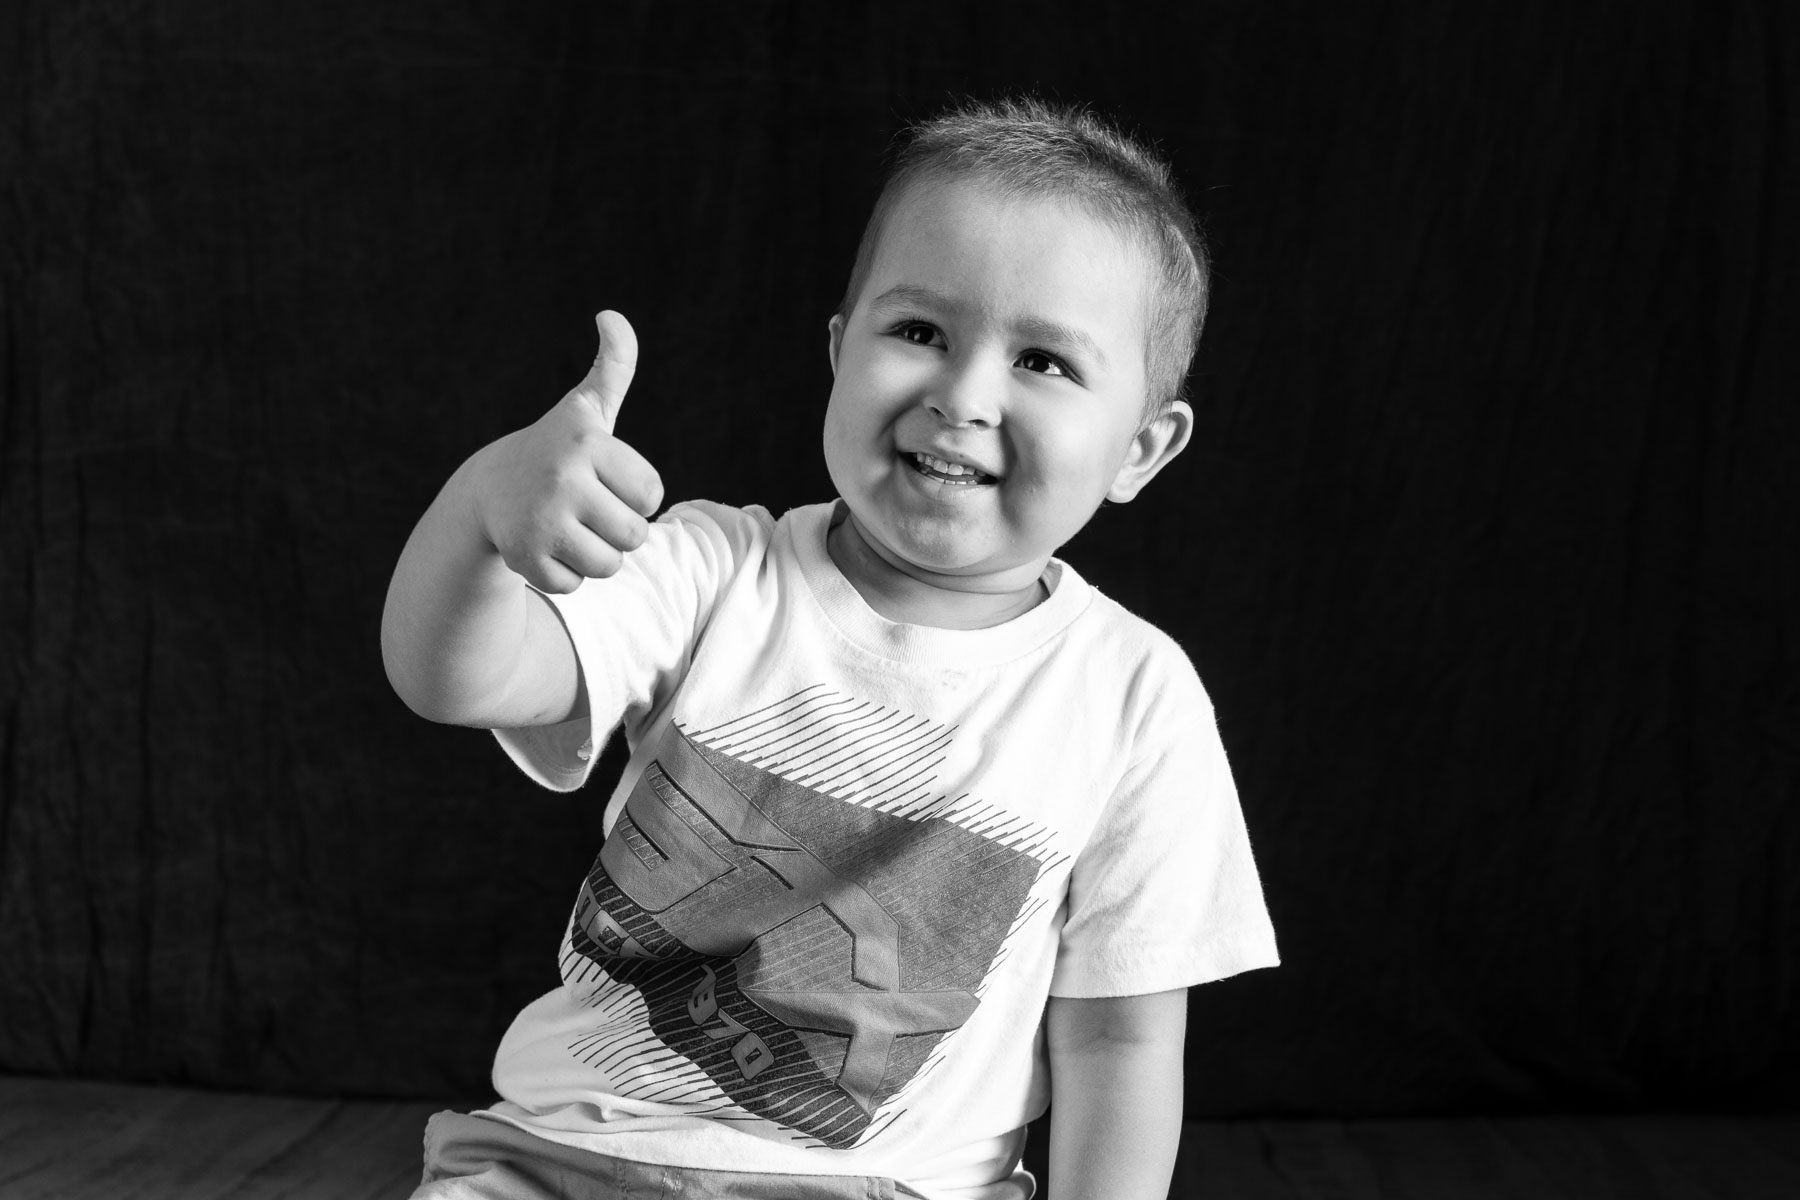 Black and white photo of a young boy giving a thumbs-up